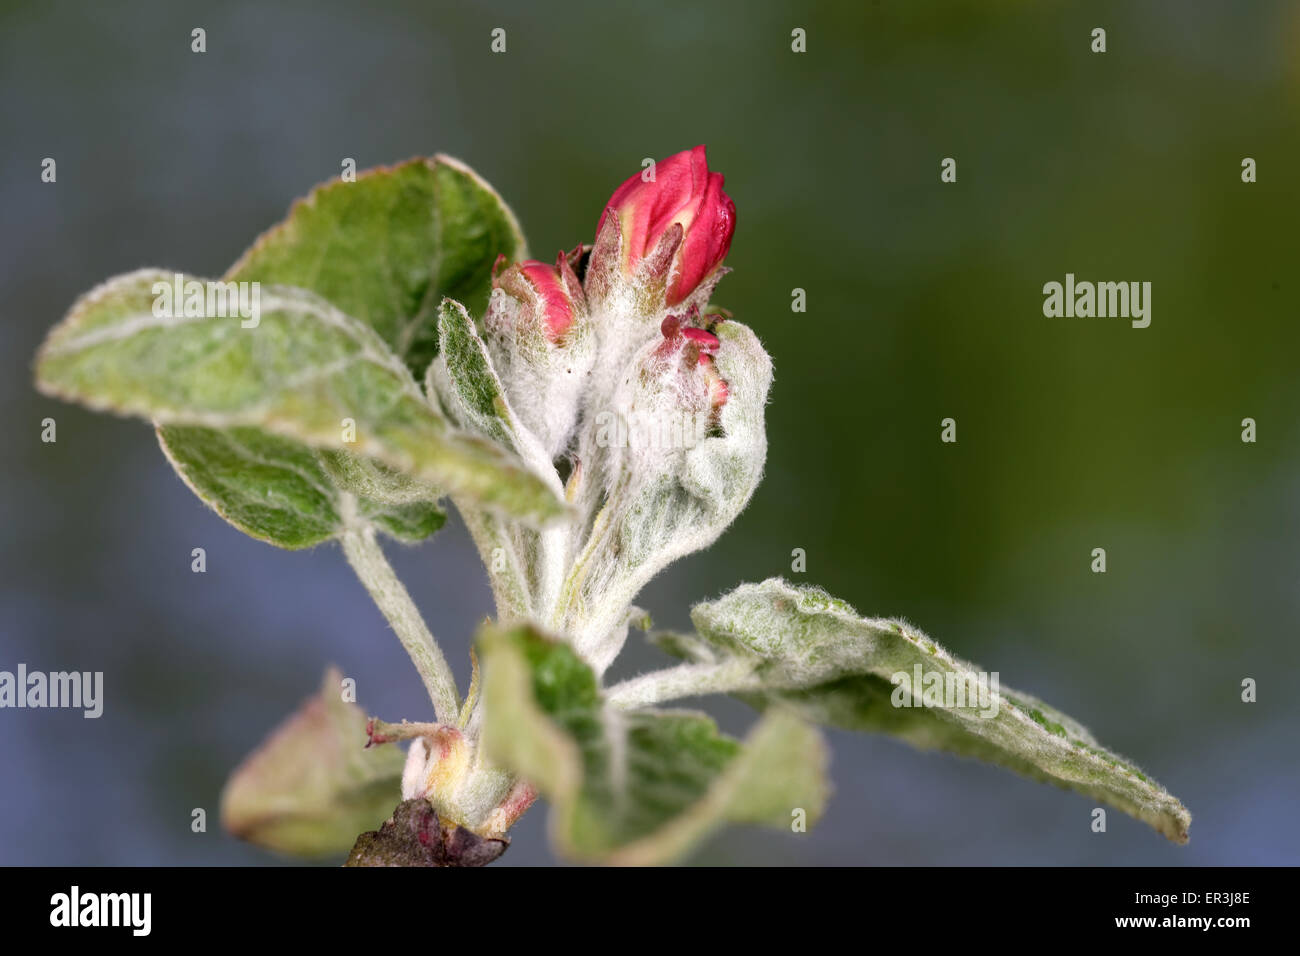 Flower buds of an old apple tree just before blooming. Stock Photo